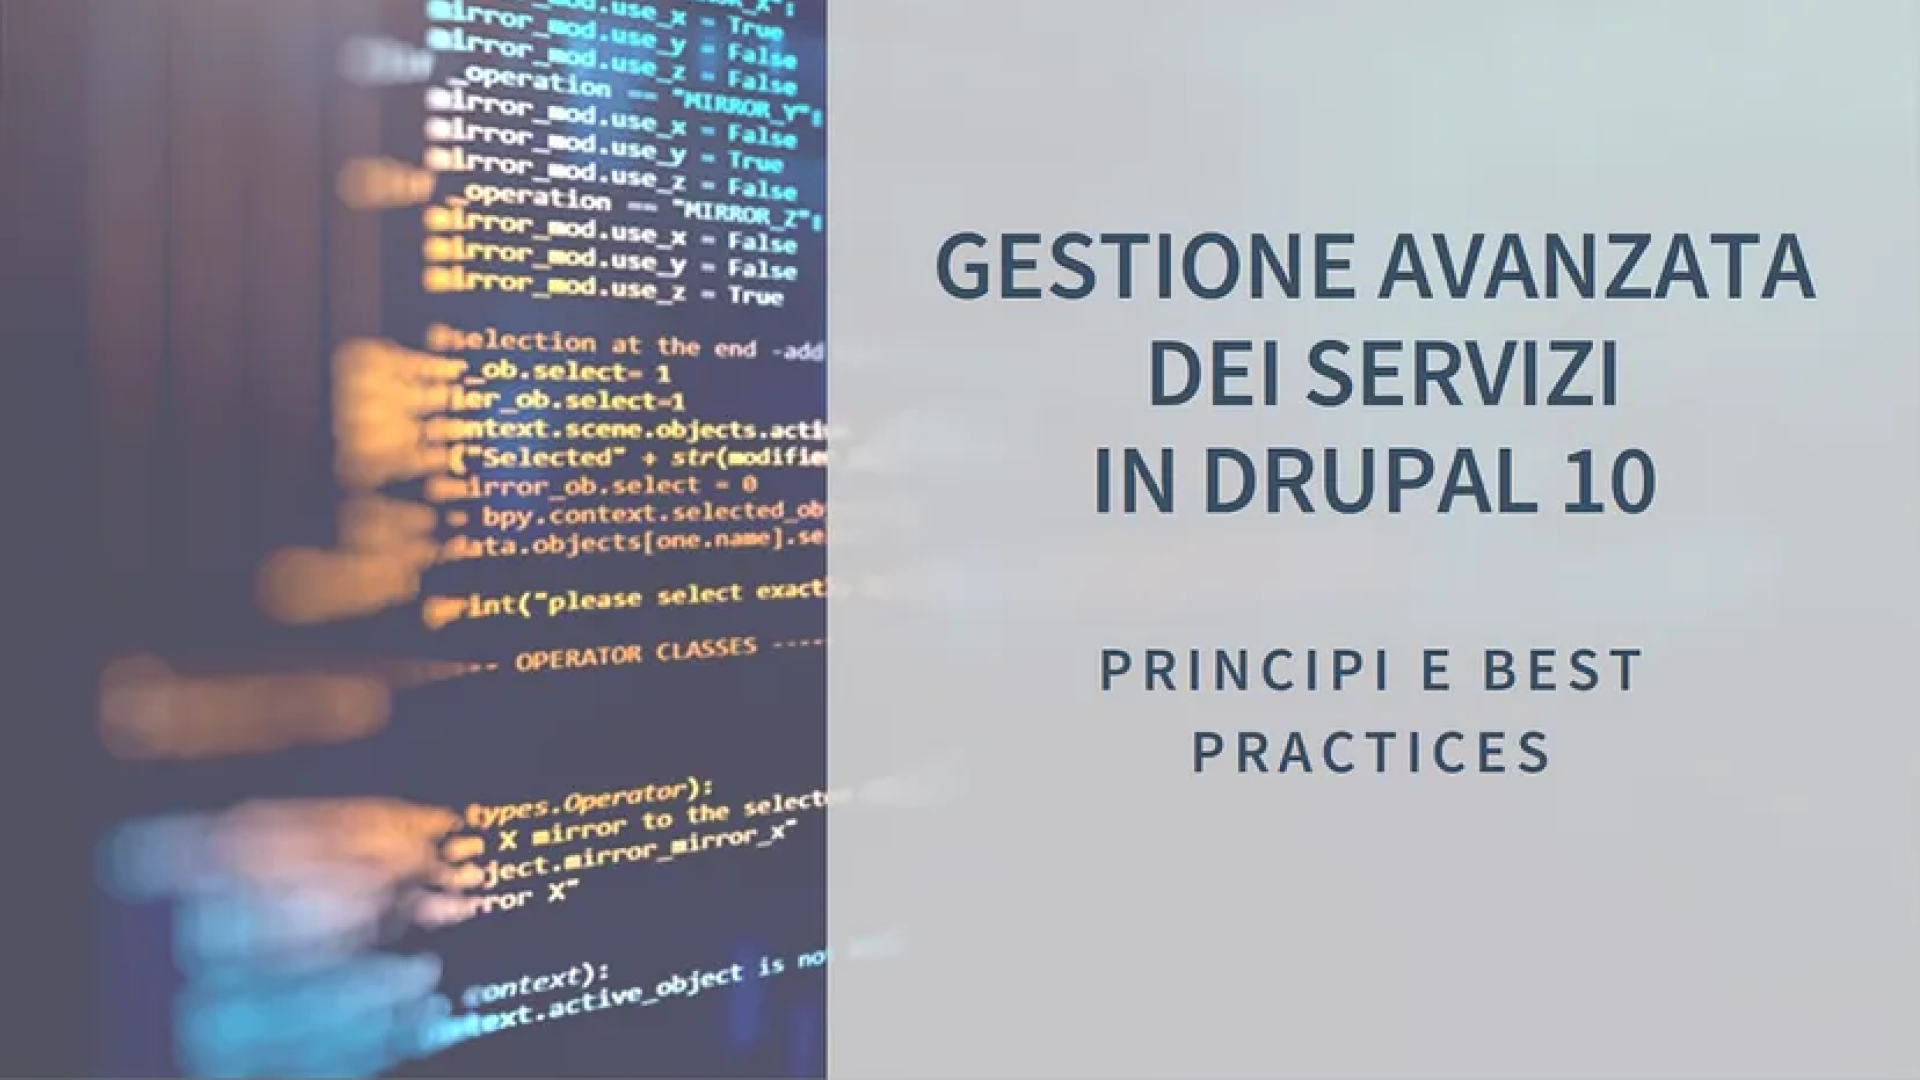 Advanced Service Management in Drupal 10: Principles and Best Practices